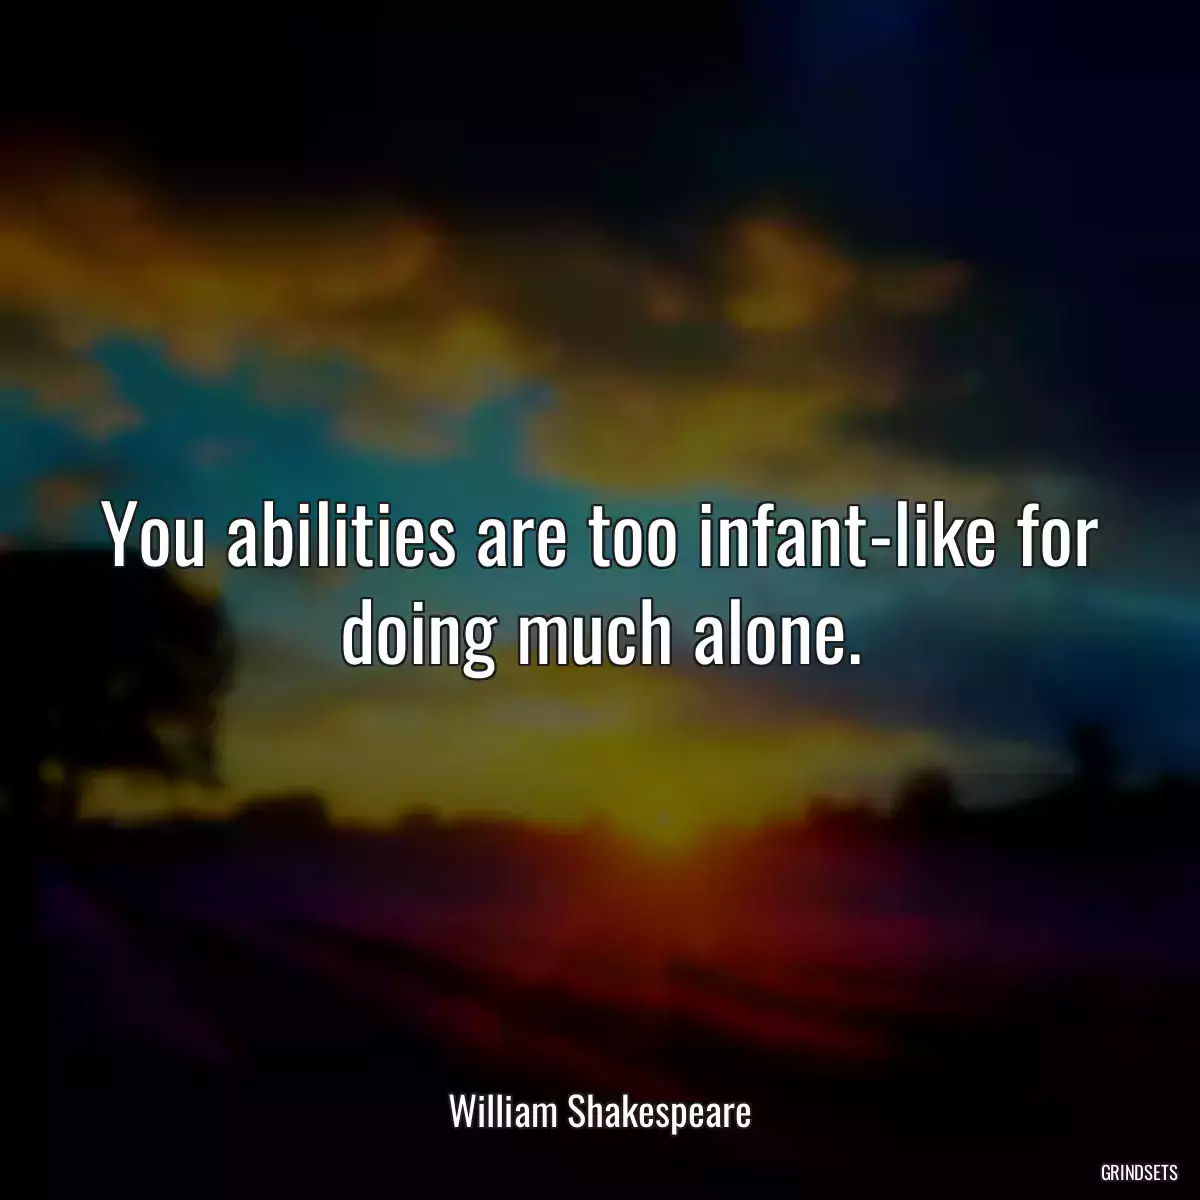 You abilities are too infant-like for doing much alone.